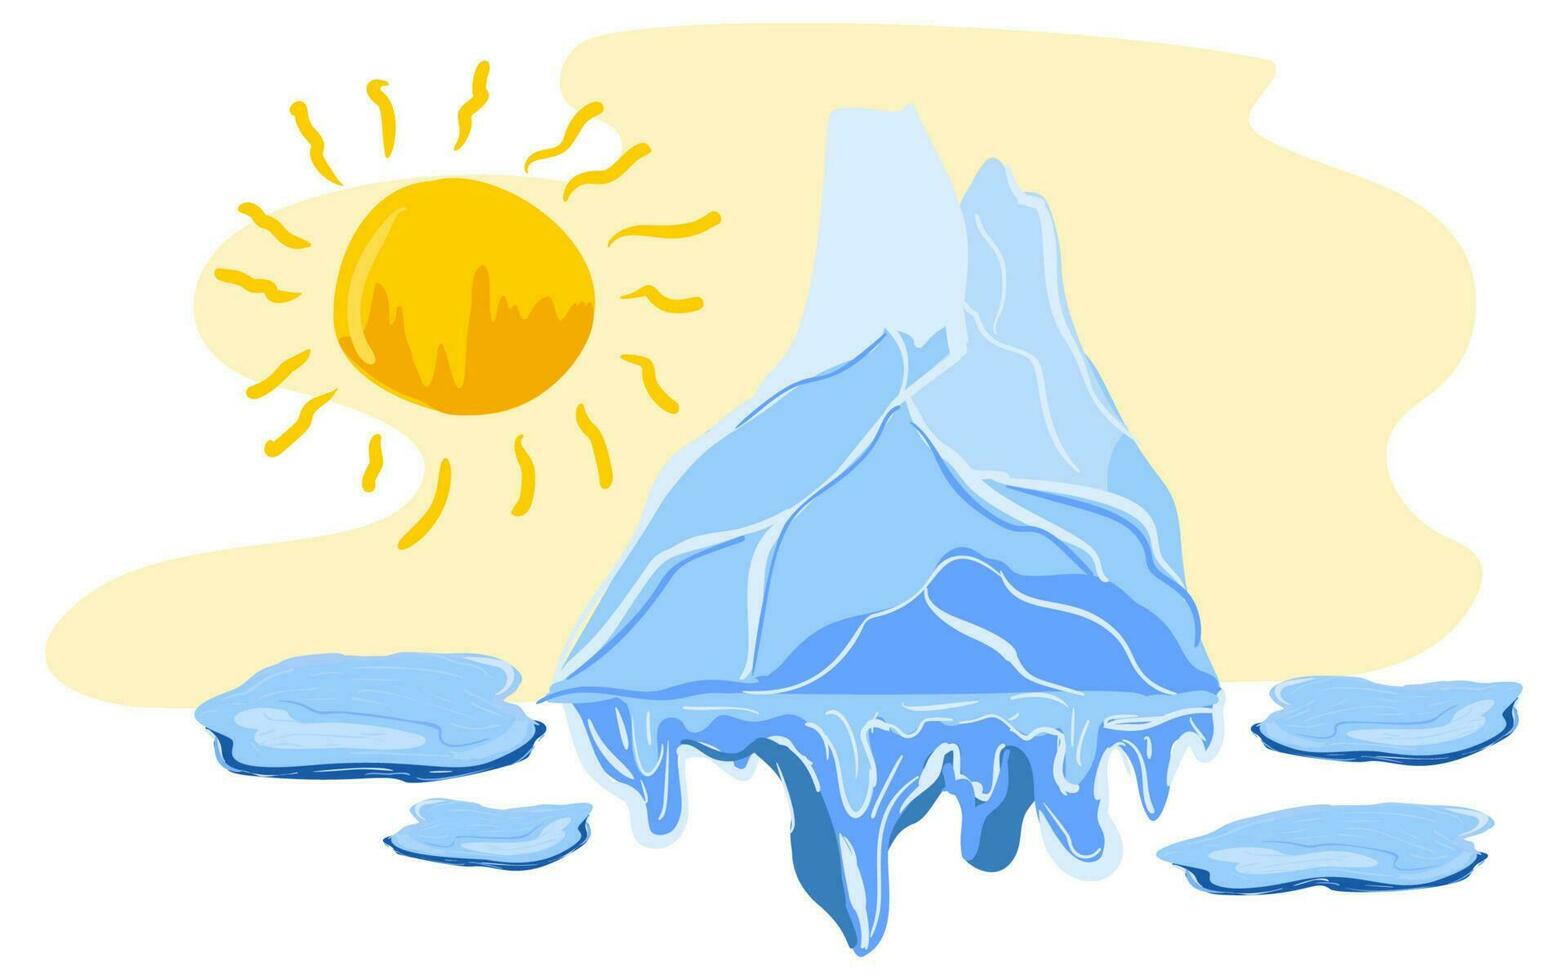 Flat style illustration of a big isolated iceberg. Climate change. Global warming illustration. Perfect for infographic design, travel concepts, and environmental themes vector